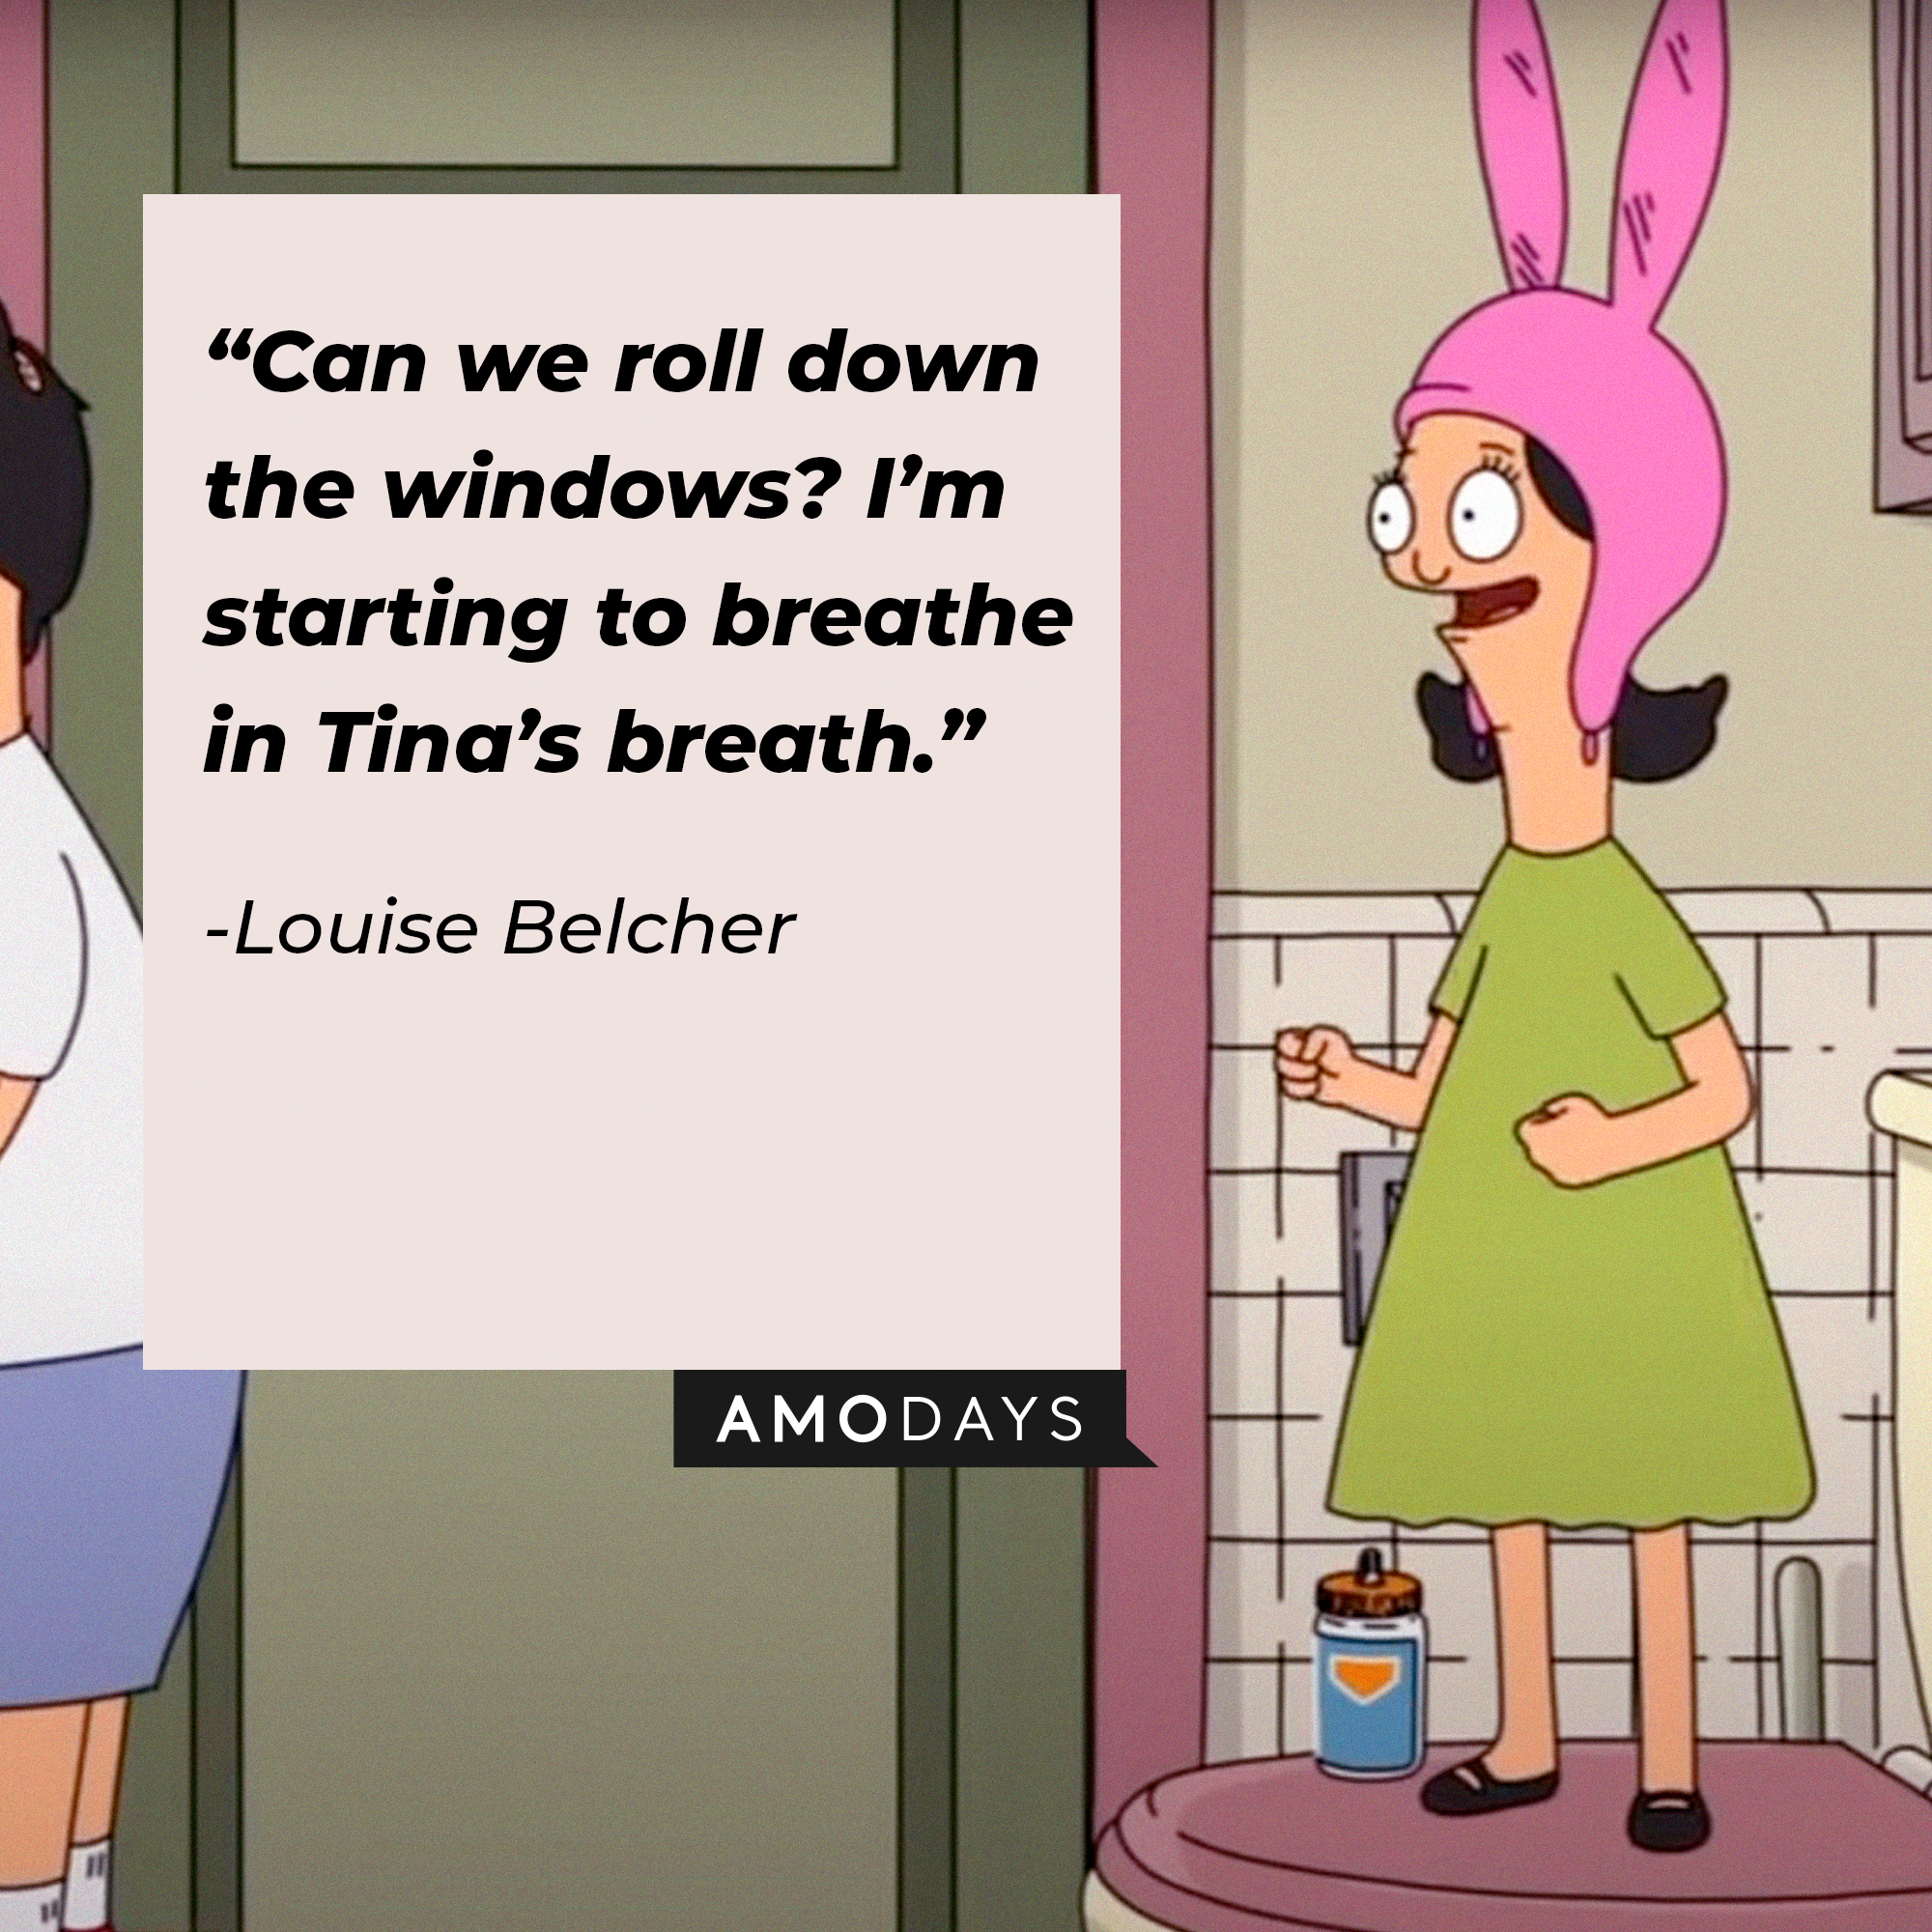 An image of Louise Belcher with her quote: “Can we roll down the windows? I’m starting to breathe in Tina’s breath.” | Source: facebook.com/BobsBurgers